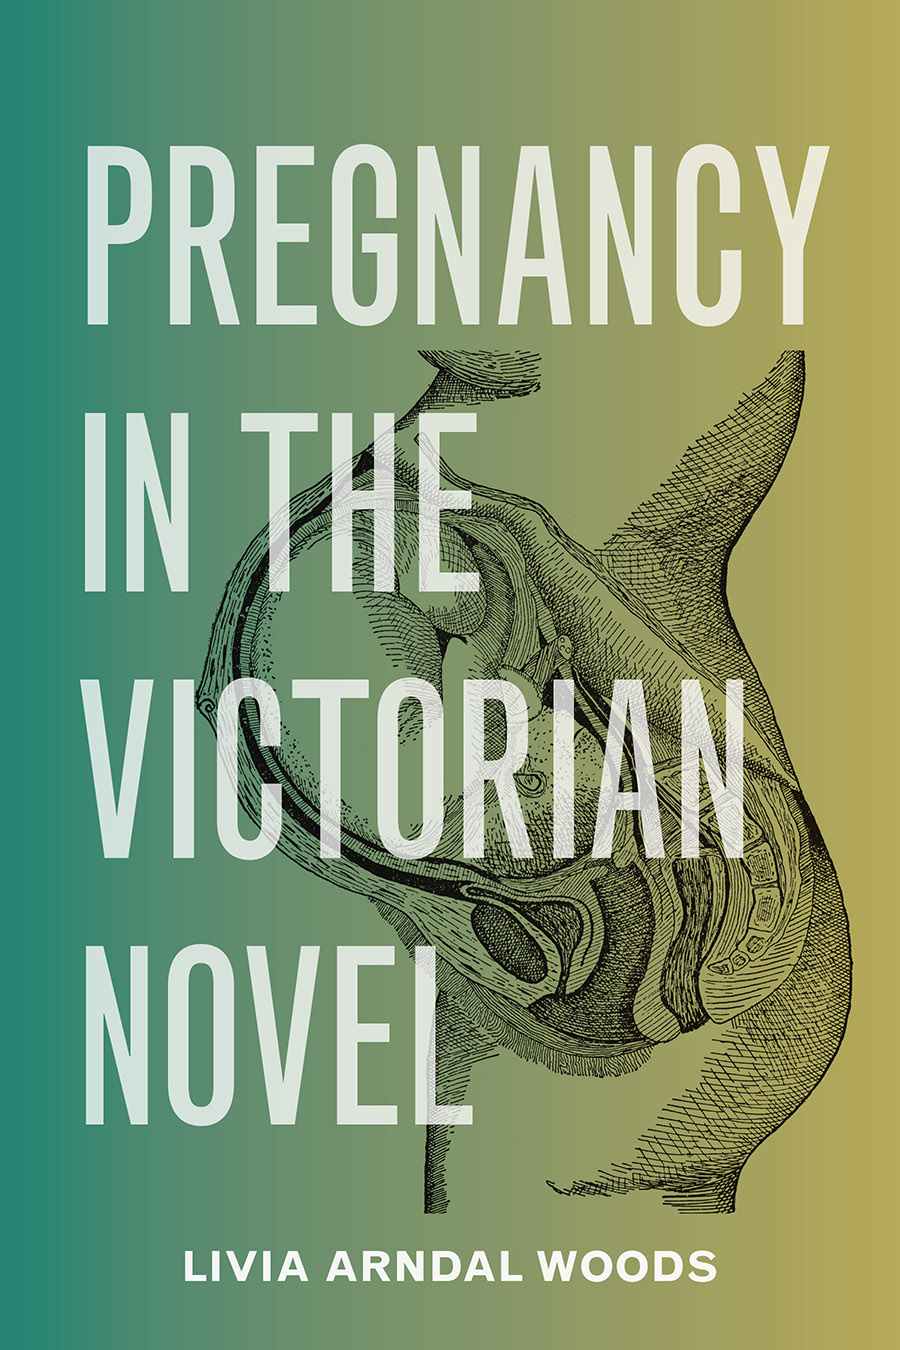 Front cover of Pregnancy in the Victorian Novel by Livia Arndal Woods, featuring a picture of an anatomical cross-section of a fetus within a pregnant woman's body.